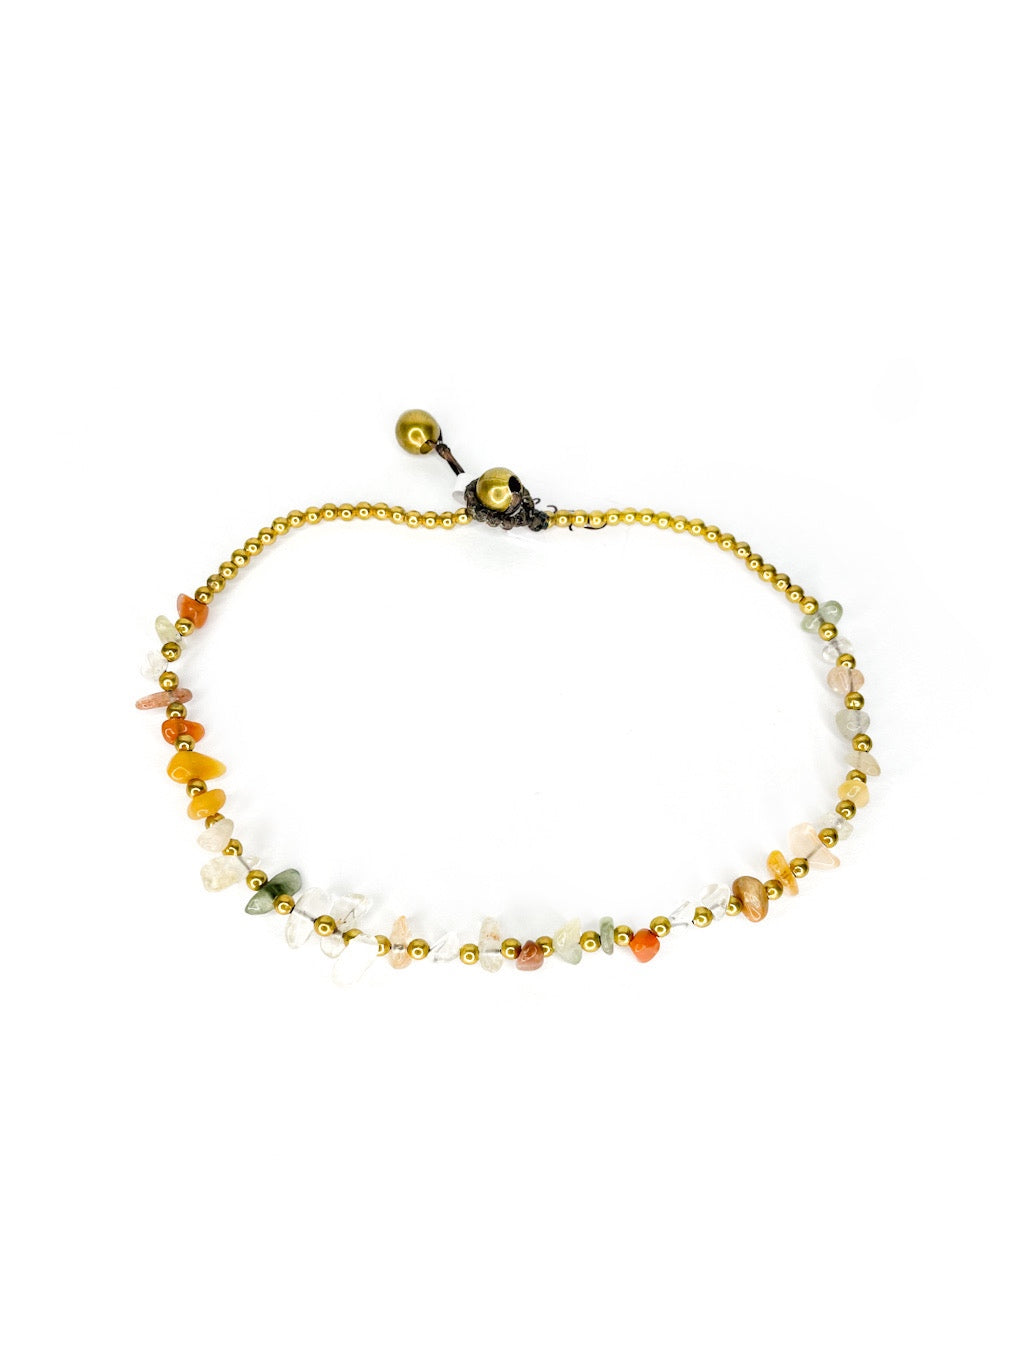 Naturally shaped stone and brass beaded anklet - various colours